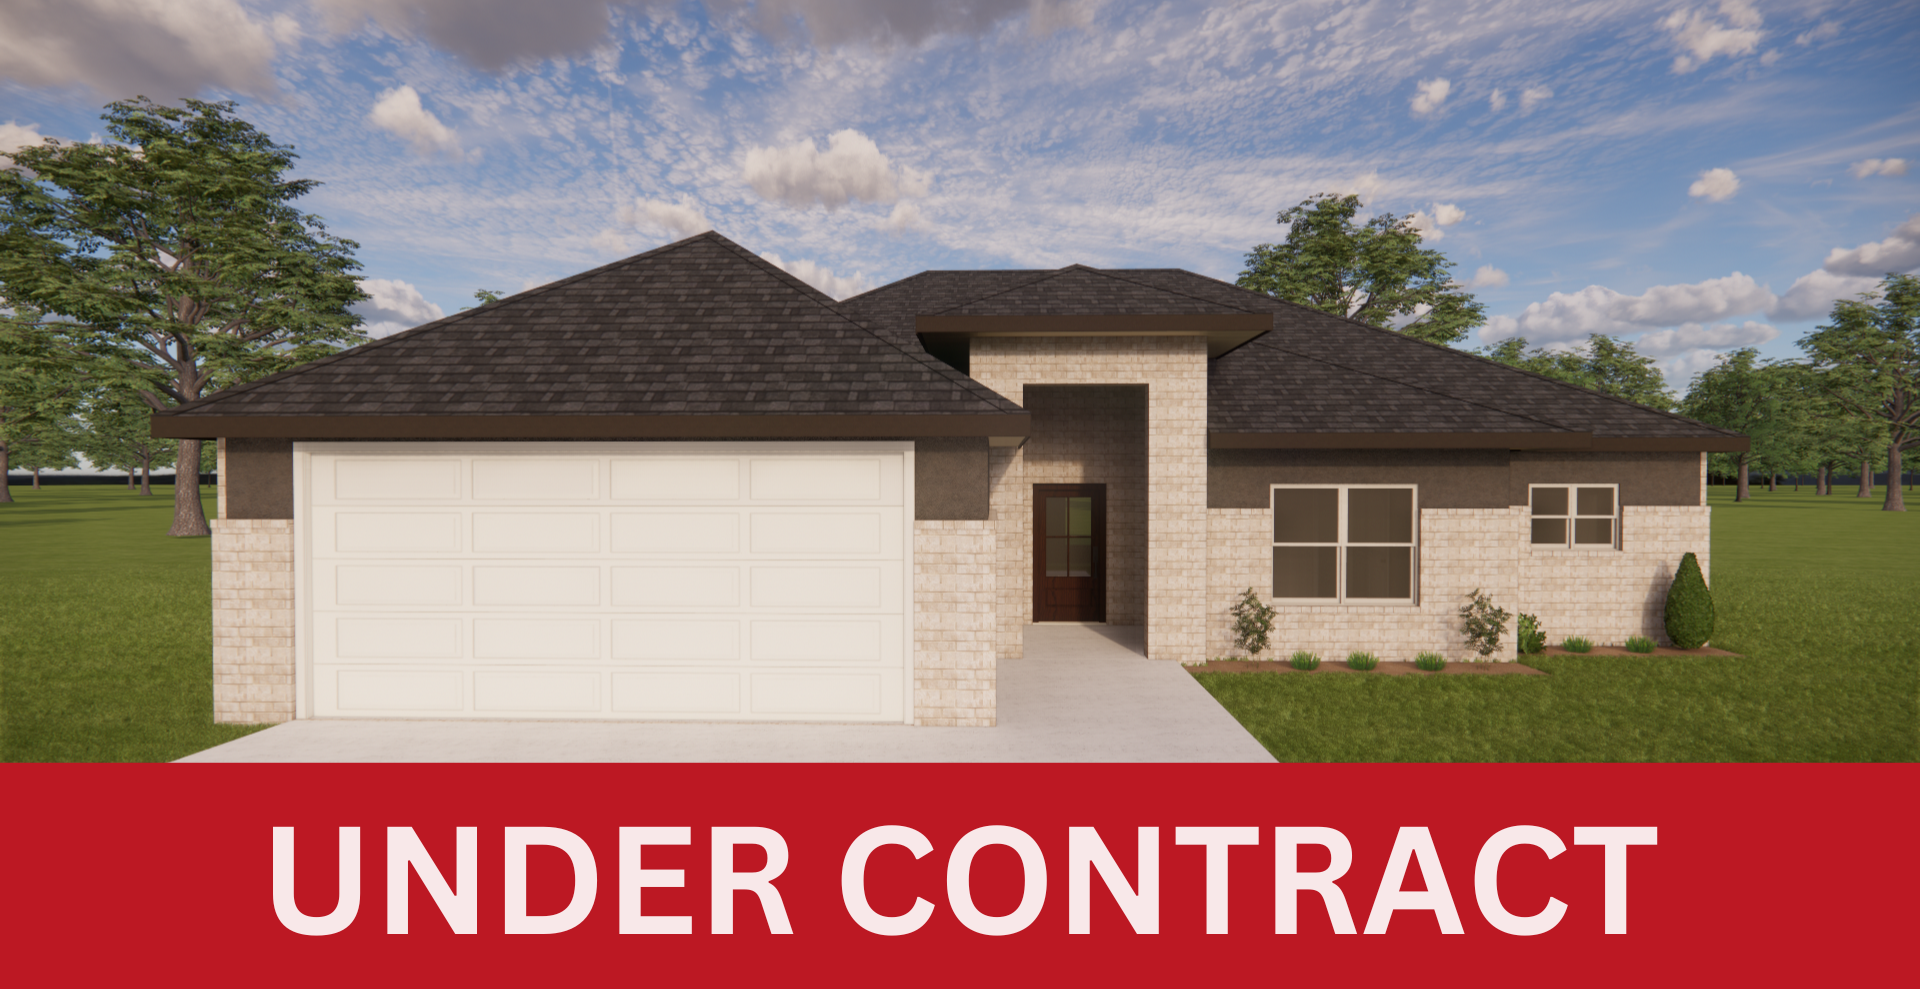 new construction home with dark roof, white garage door, and lighter brick. single level house